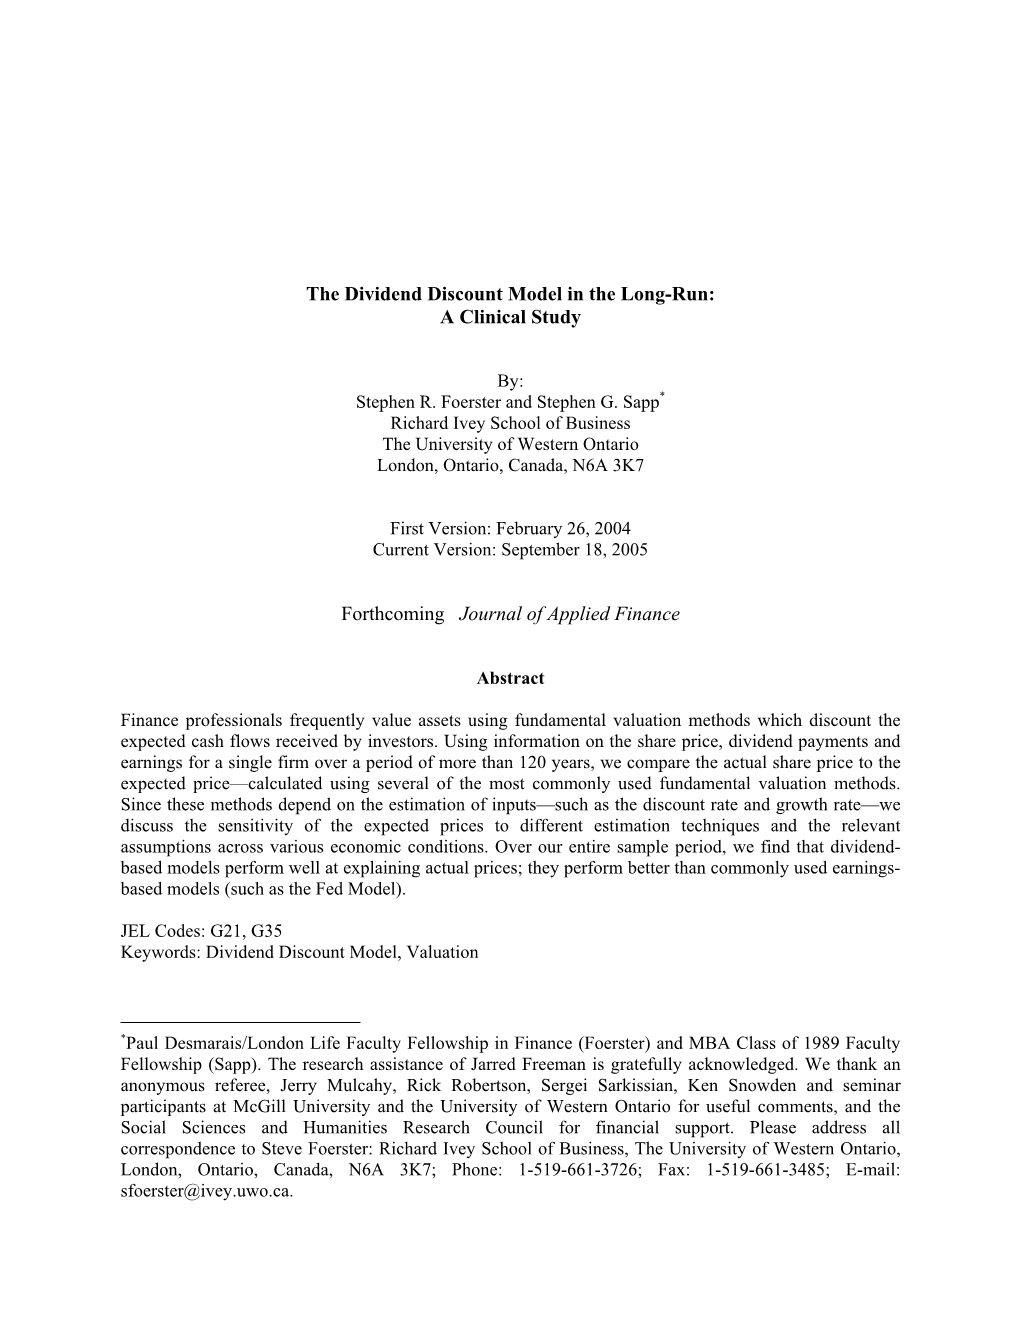 The Dividend Discount Model in the Long-Run: a Clinical Study